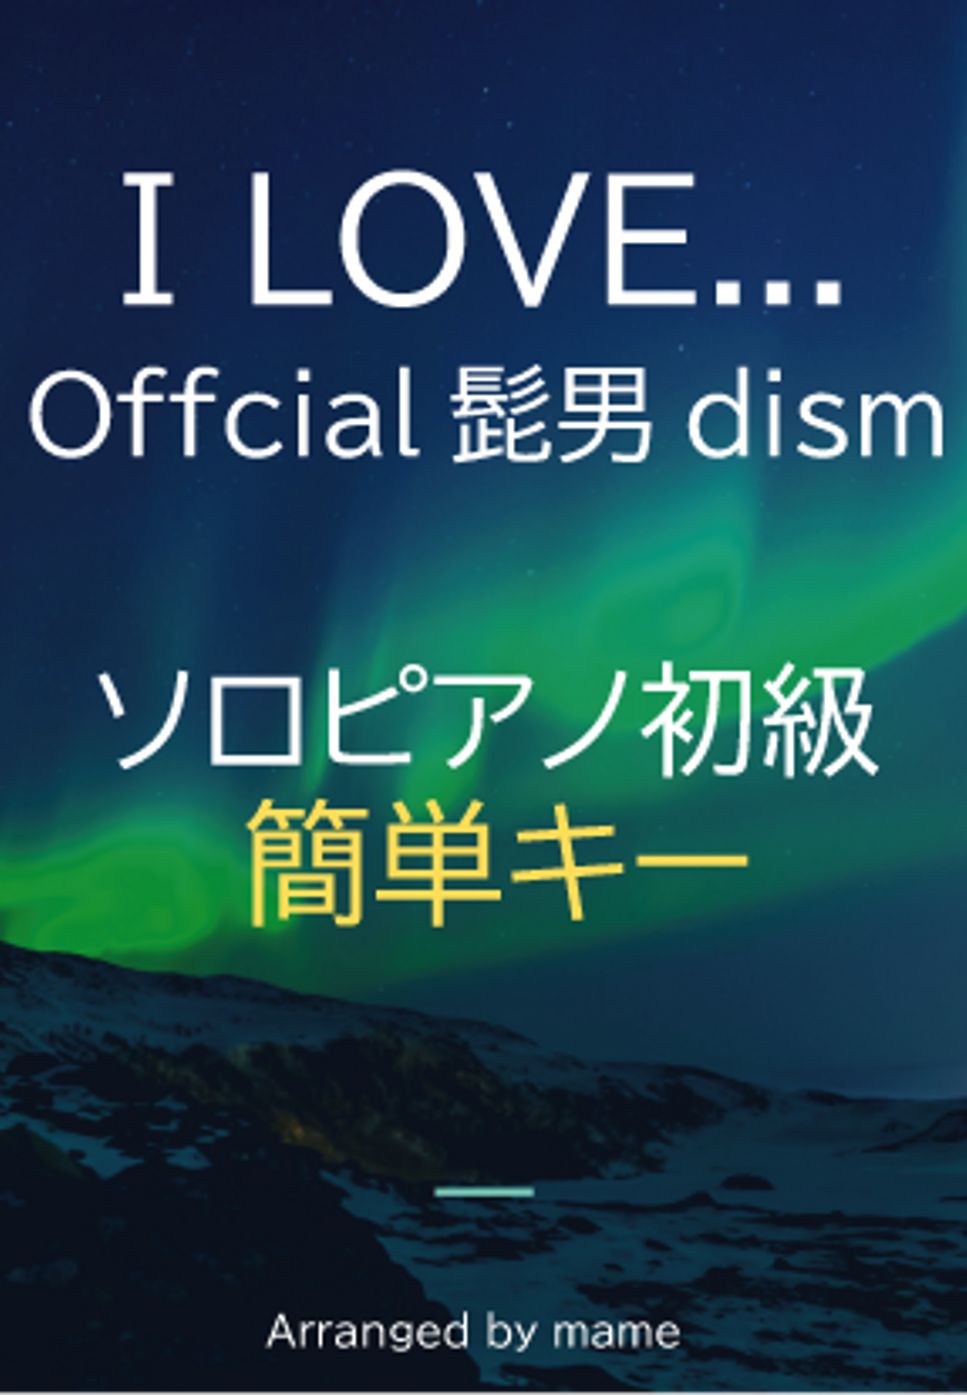 Official髭男dism - I LOVE...(簡単キー) by mame